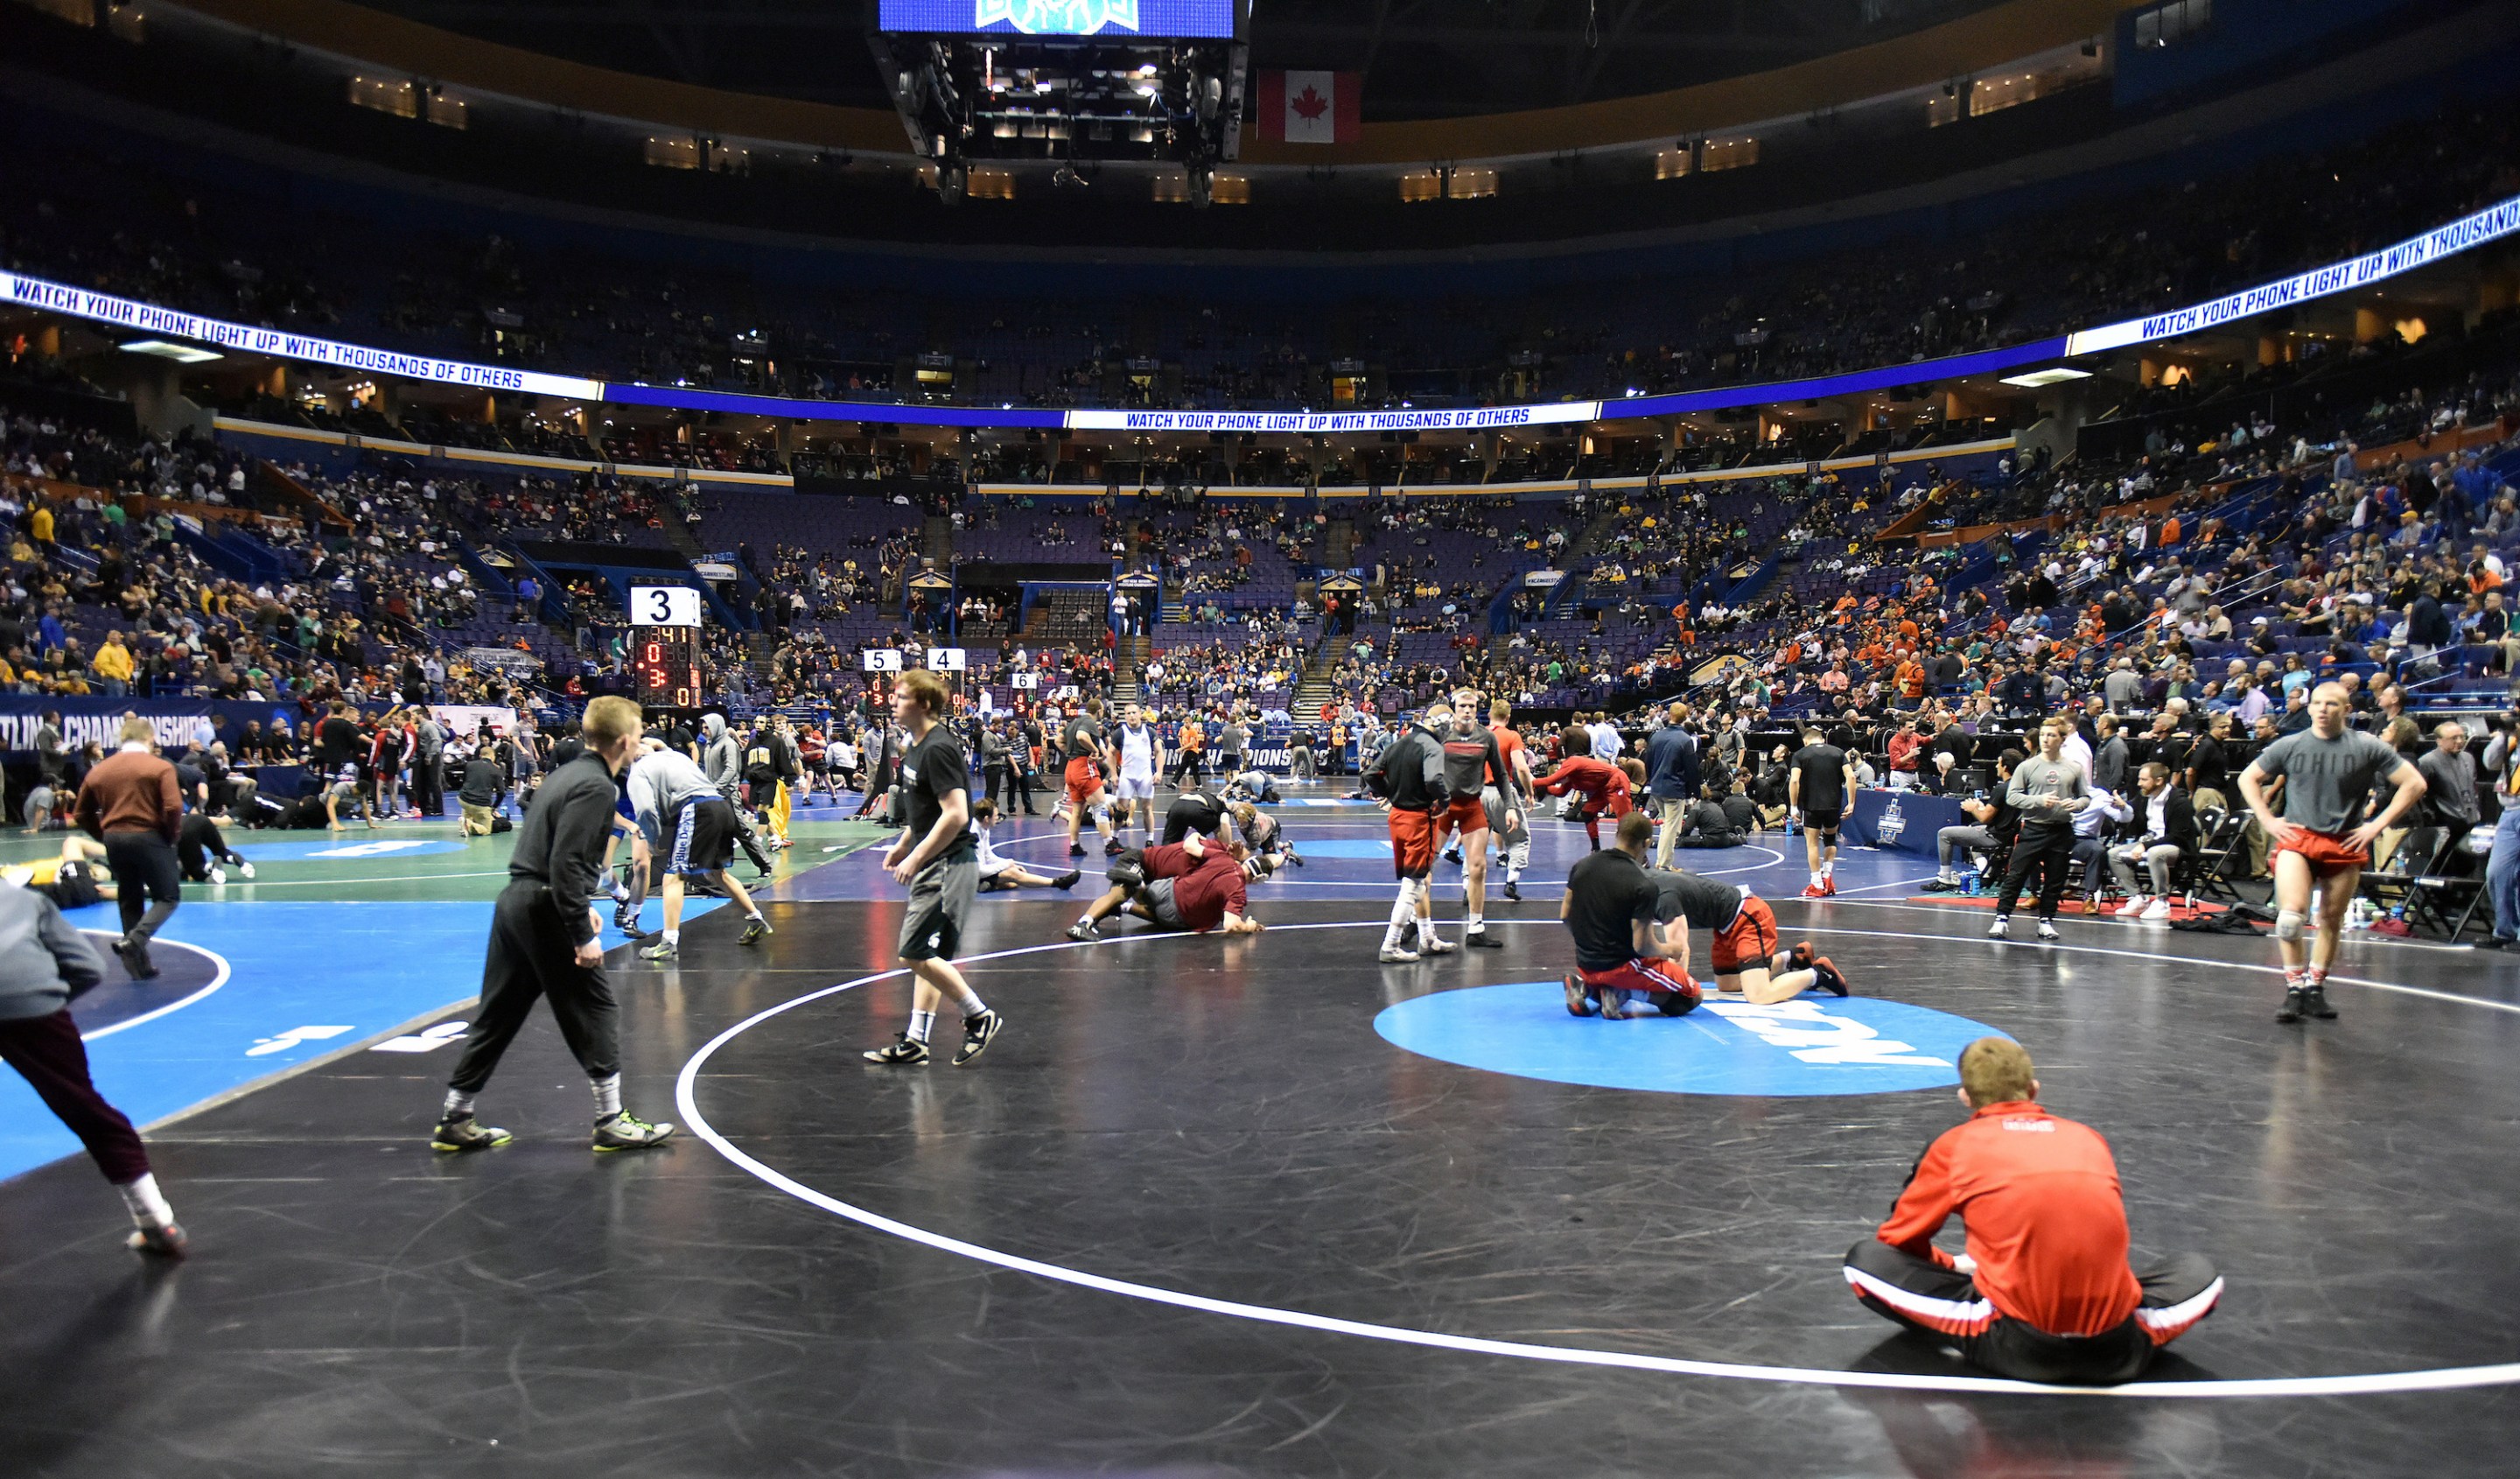 Wrestlers warm up on the mat during the 2017 NCAA Wrestling Championships in St. Louis.